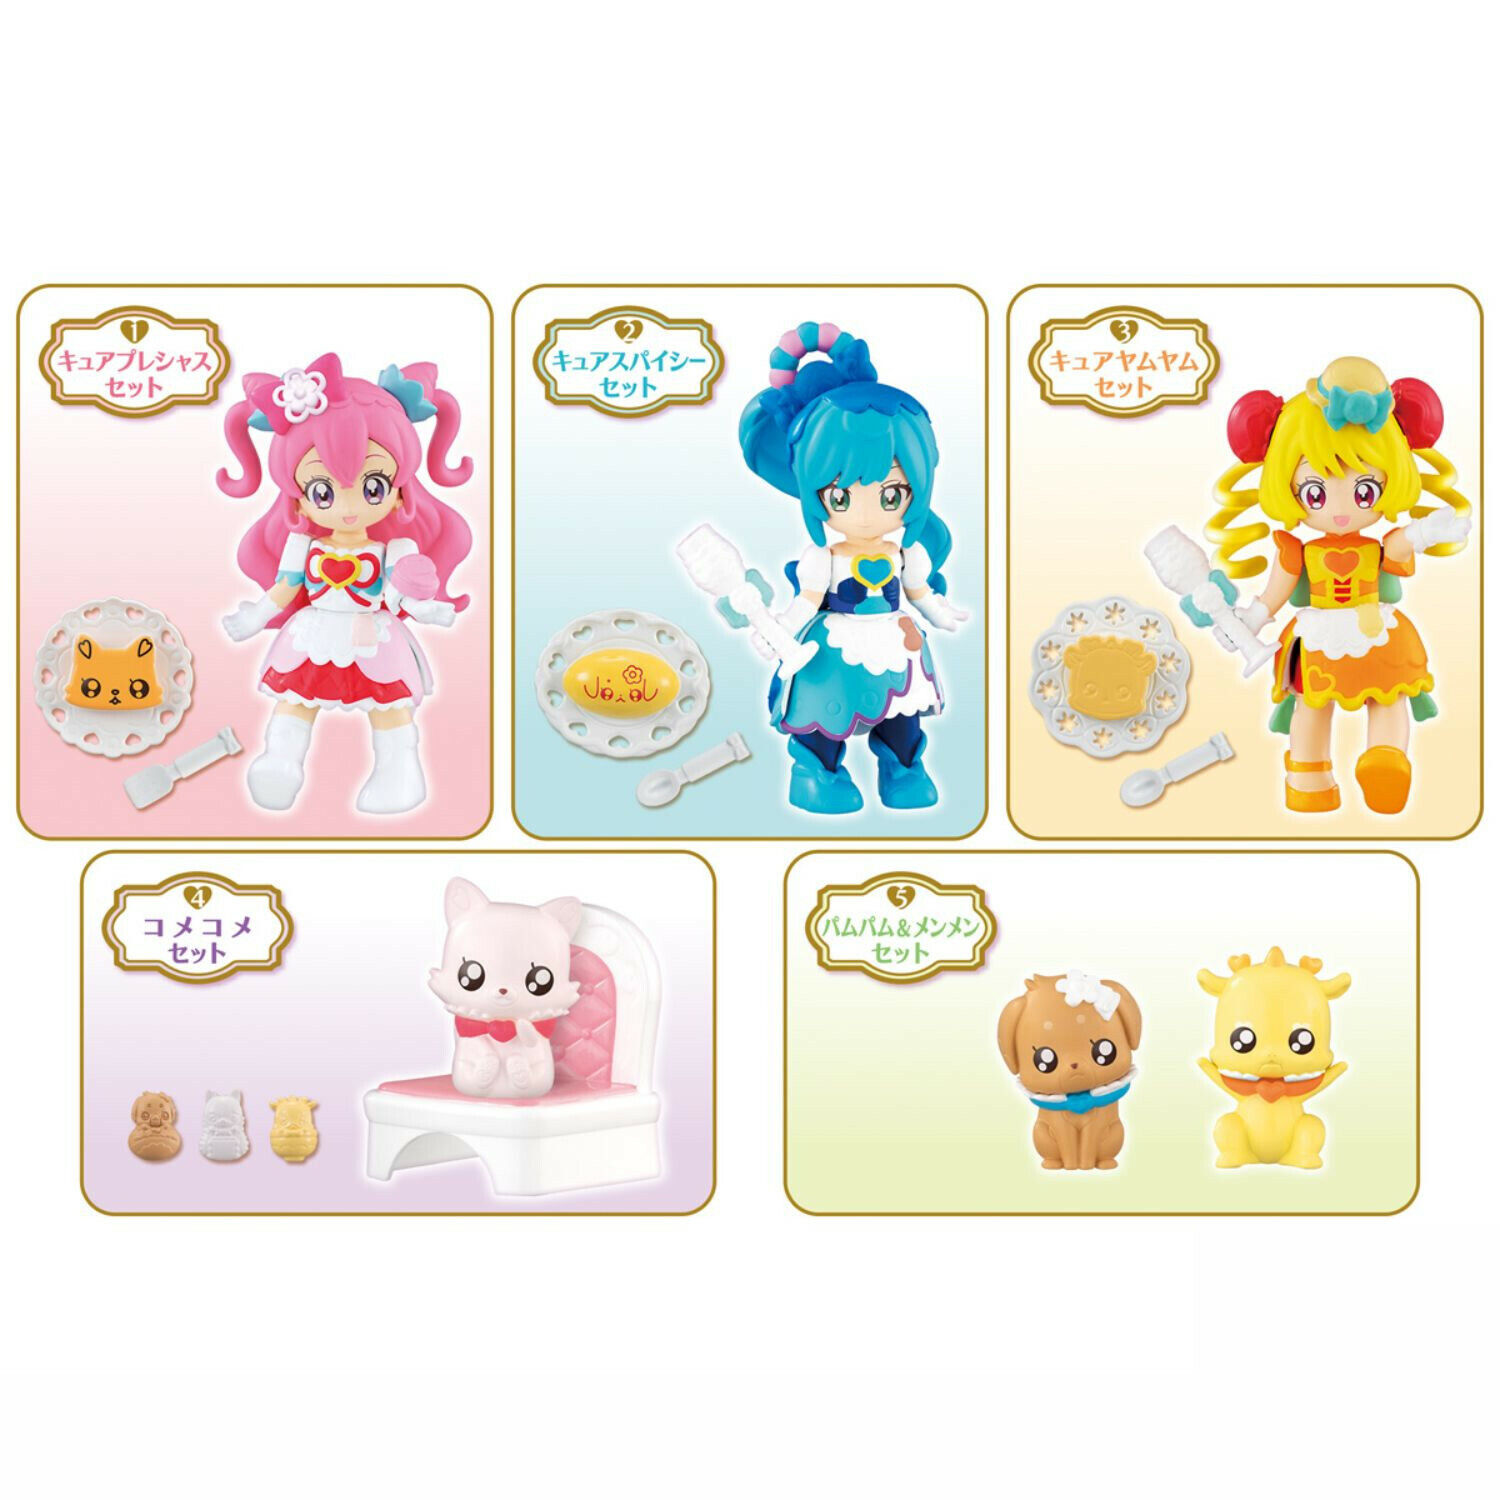 New Bandai Delicious Party Pretty Cure Precure figure 5 Types set / toy